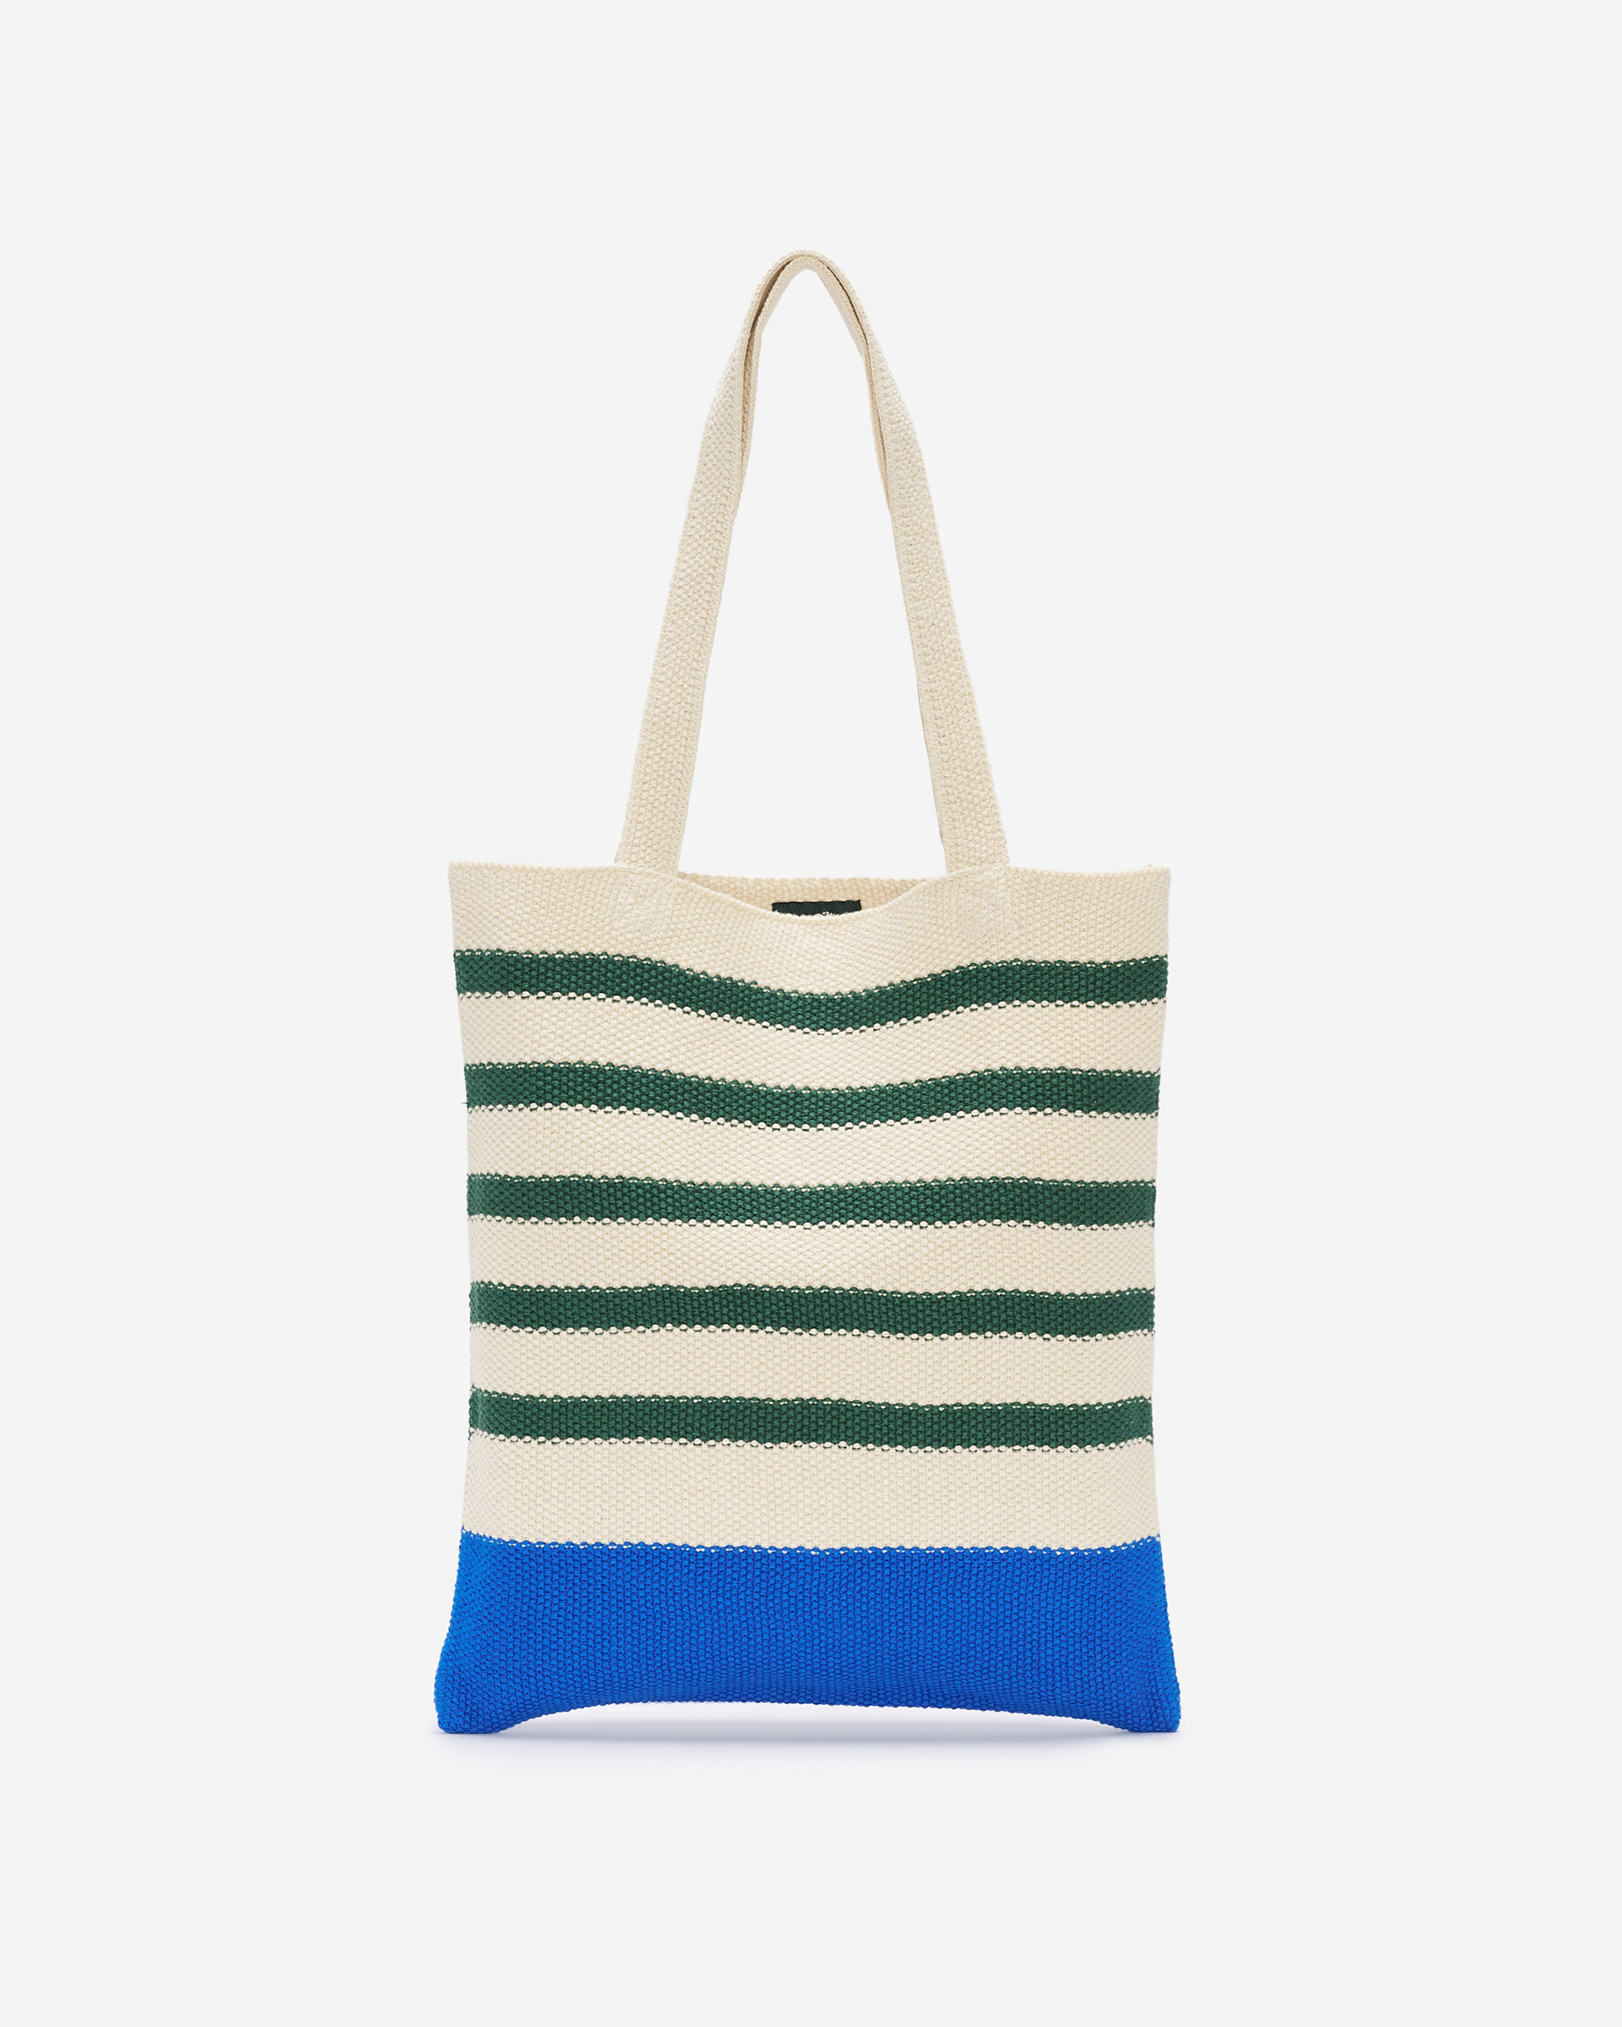 Roots Colwood Crochet Tote Bag in Assorted